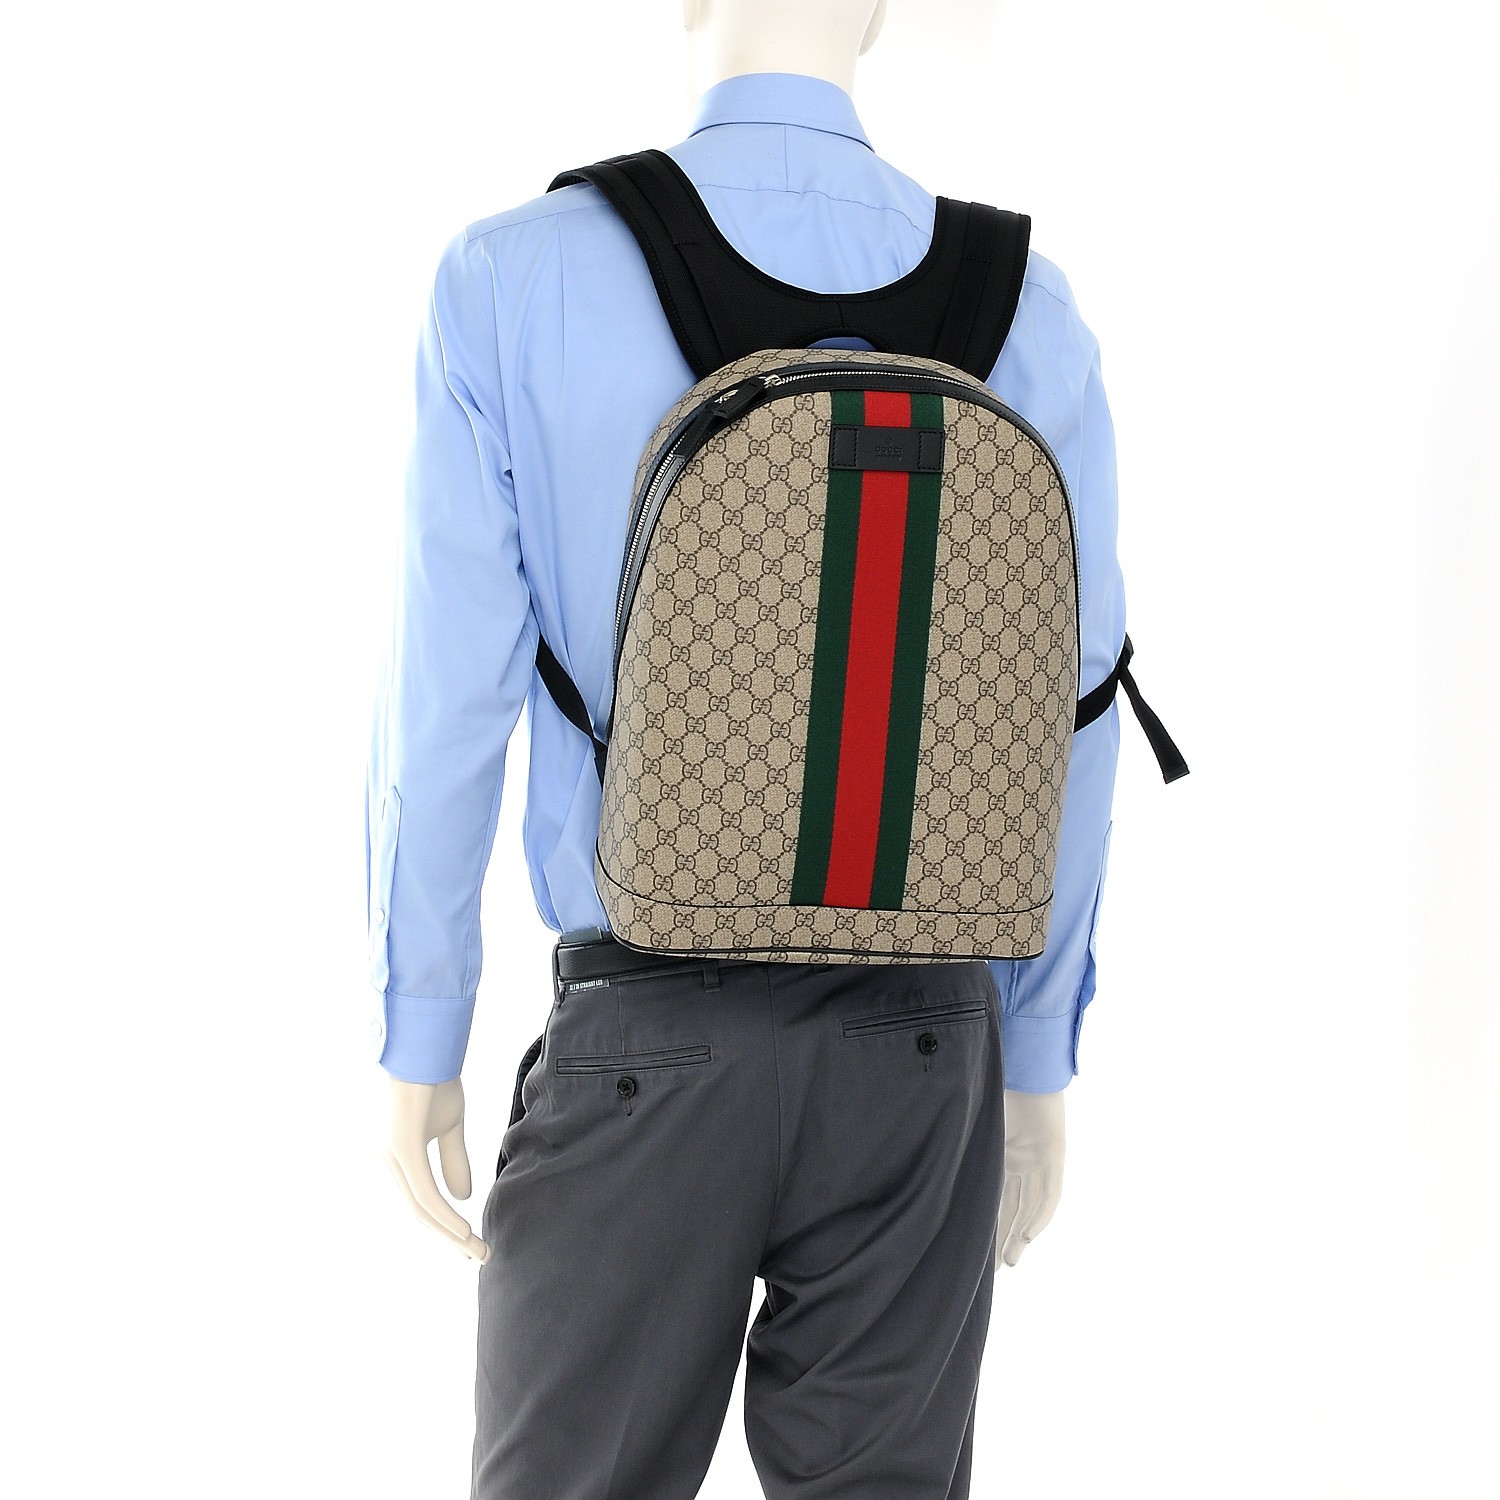 Gucci Gg Supreme Backpack Black Top Sellers, UP TO 55% OFF | www 